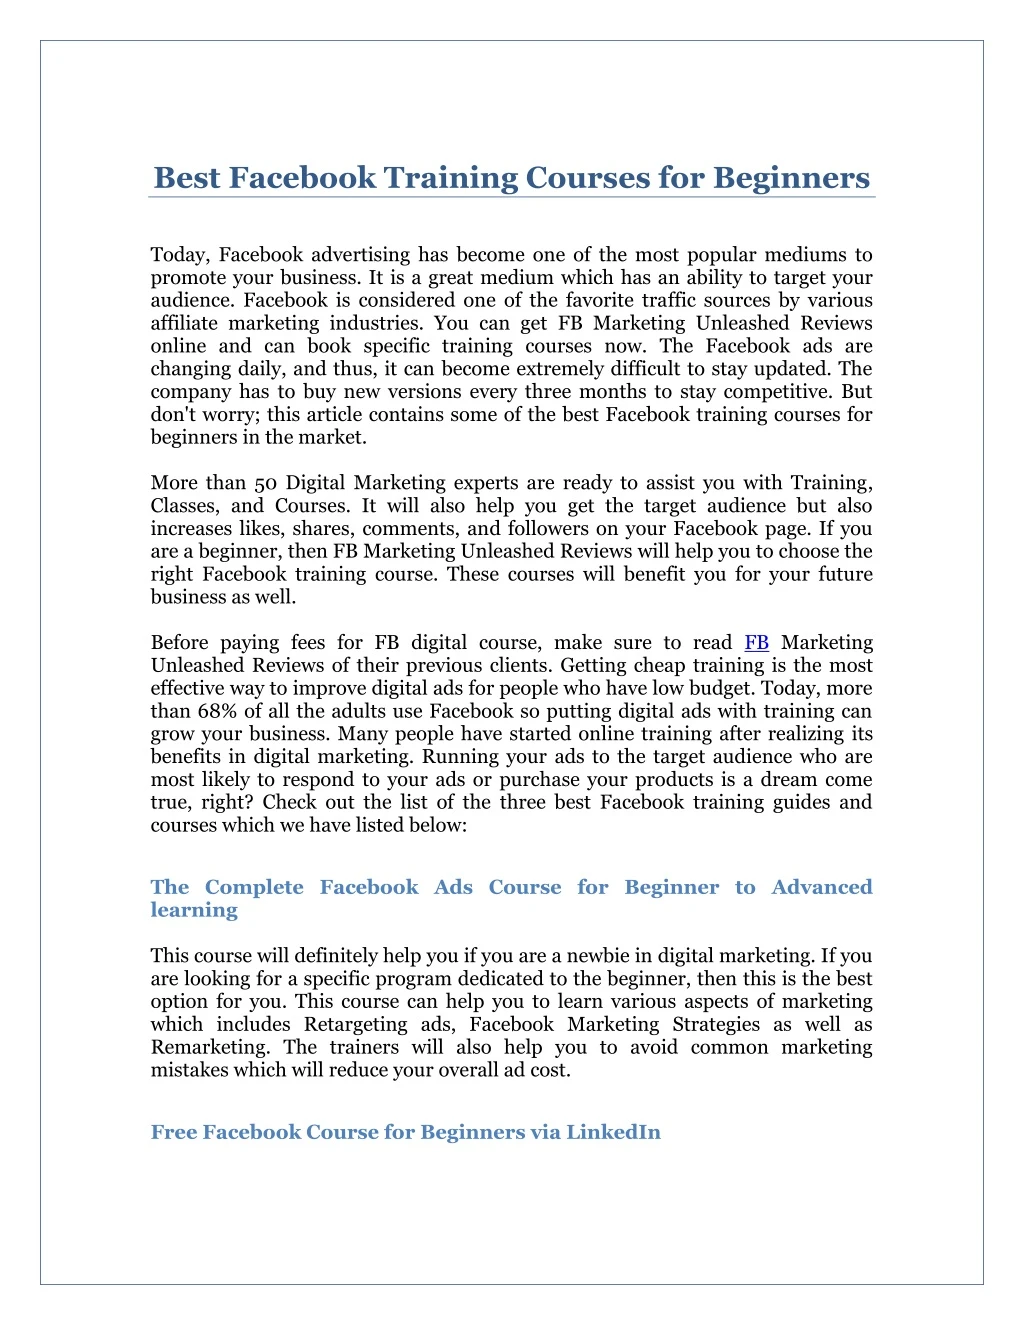 best facebook training courses for beginners